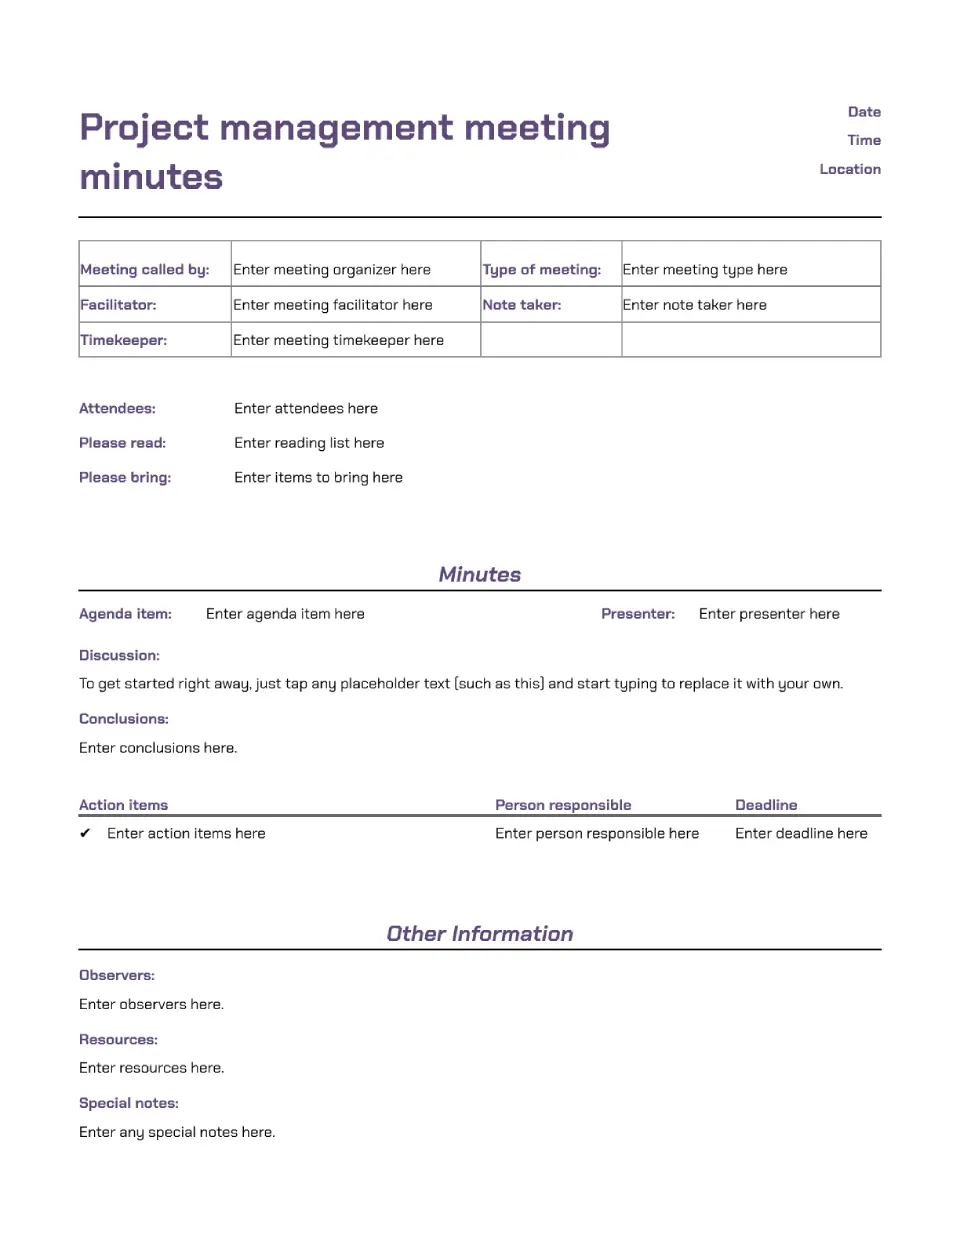 Project Management Meeting Minutes Template for Google Docs